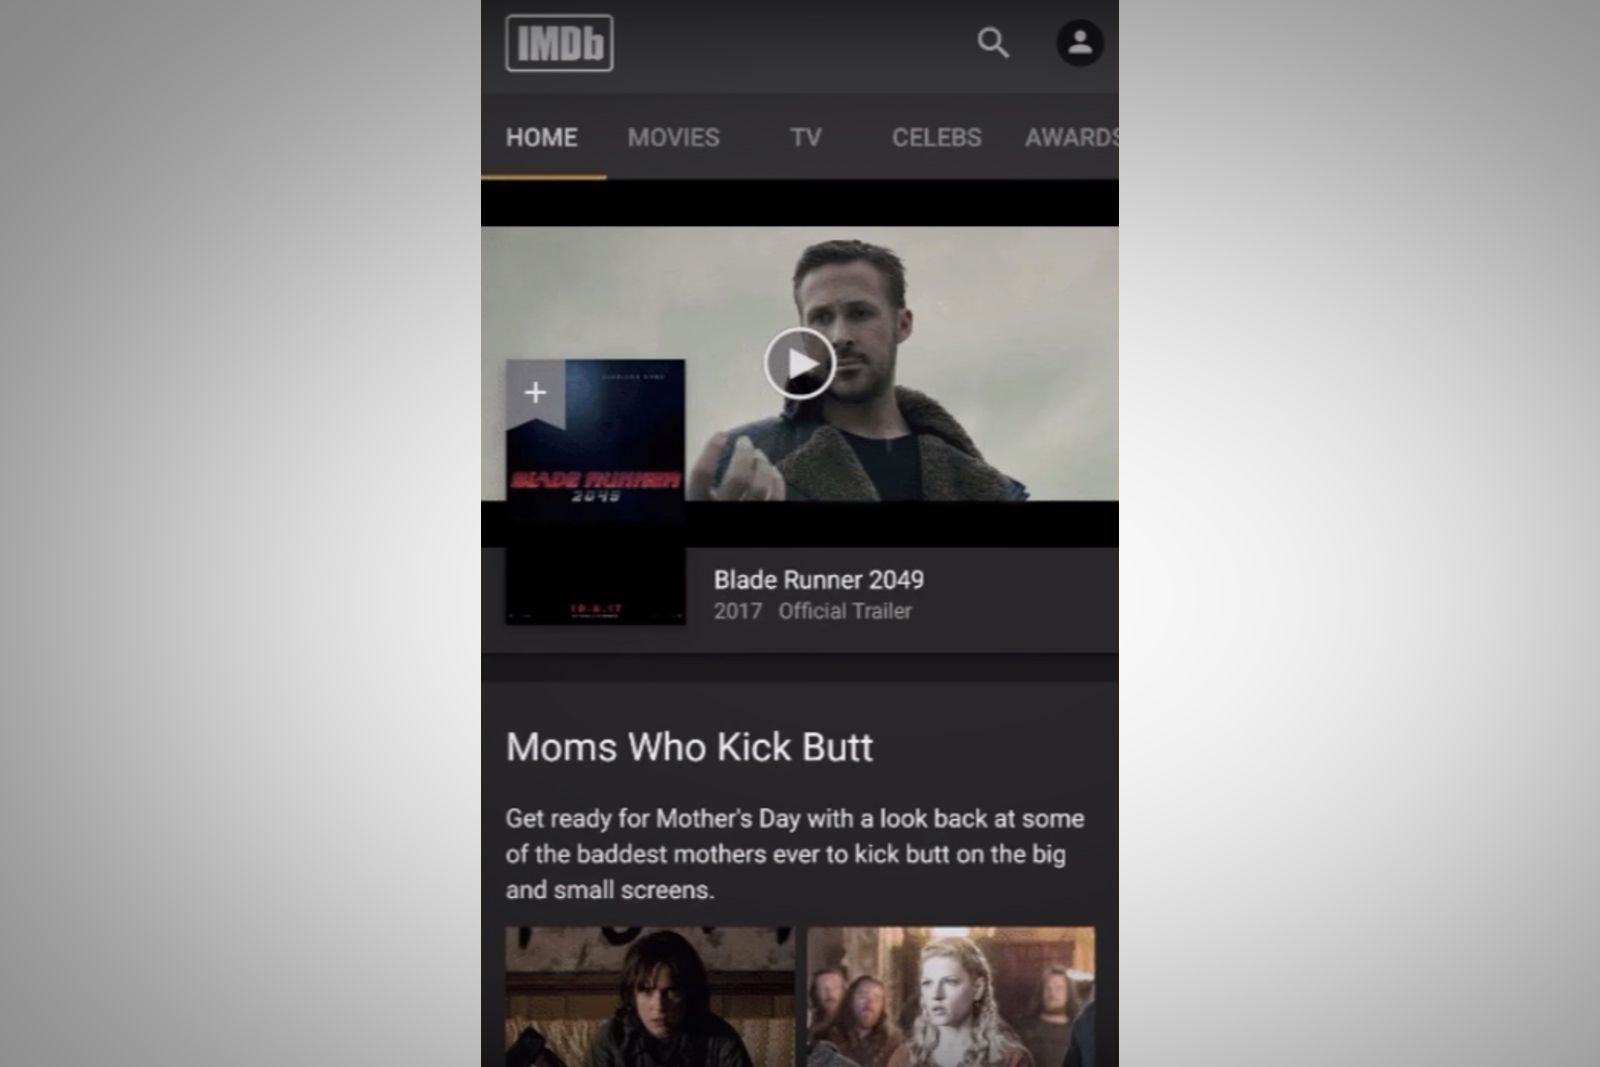 Amazon might announced an IMDb video streaming service soon image 1